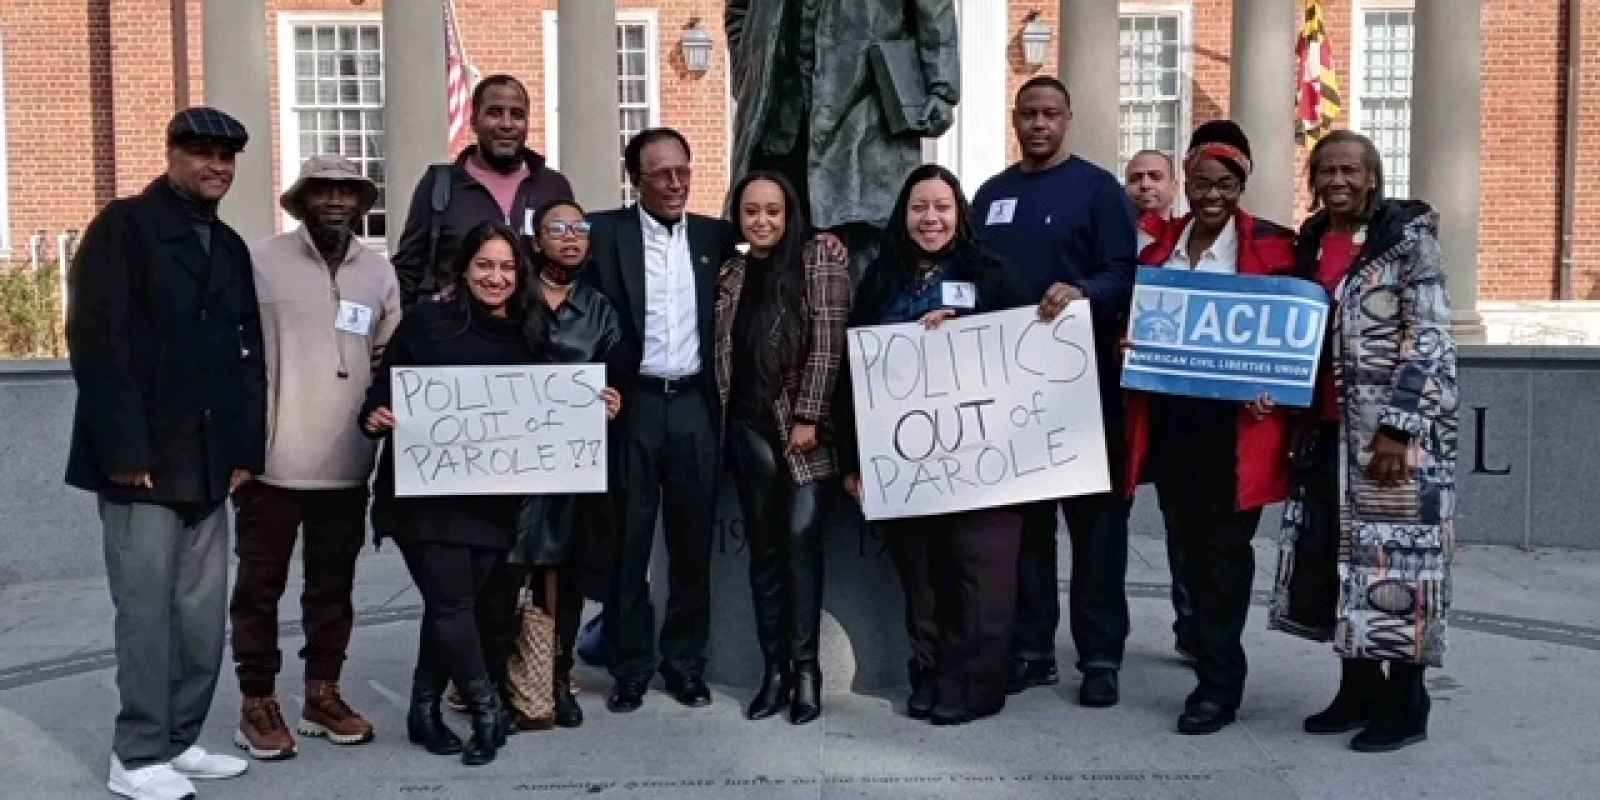 Group of advocates celebrate the veto override of parole reform in Annapolis, Maryland. They stand in front of the Thurgood Marshall statue. Some hold signs about getting politics out of parole and one person holds a sign with the ACLU-MD logo.